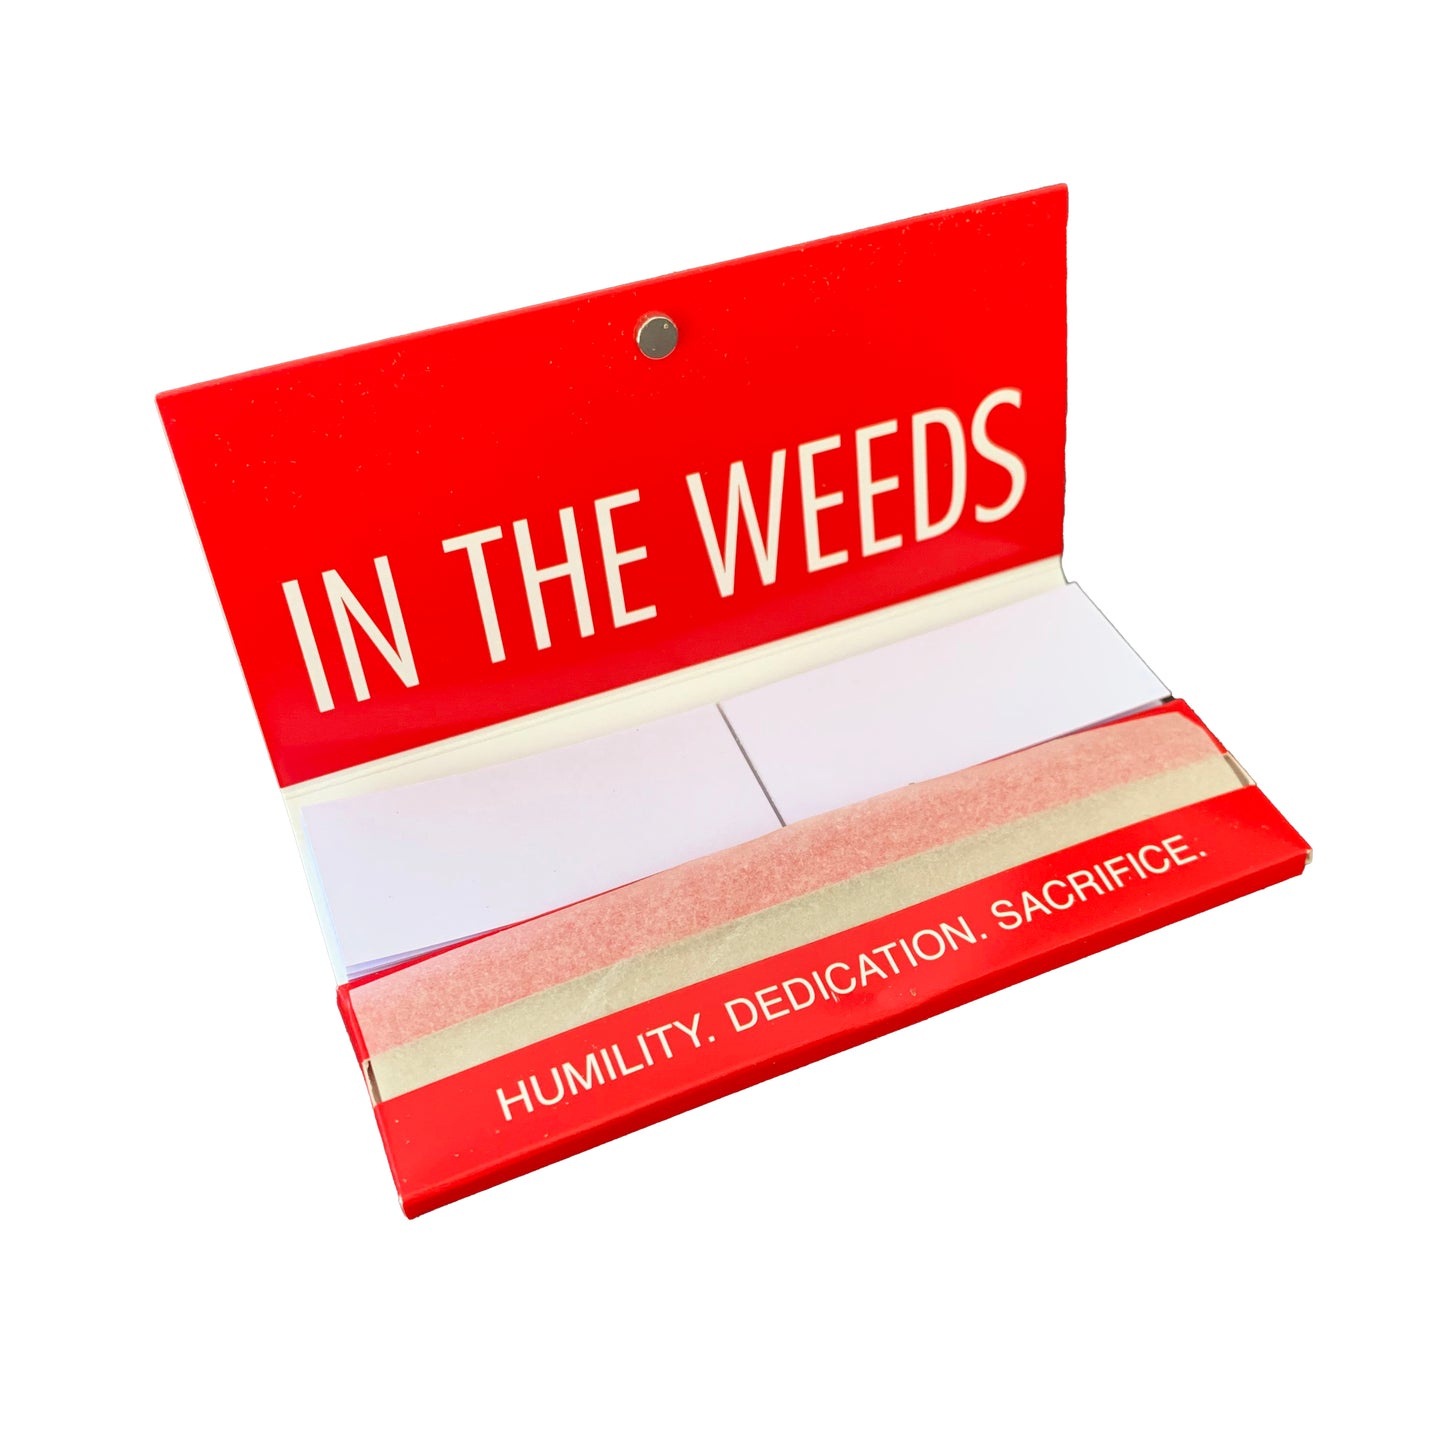 Premium King-Size Rolling Papers